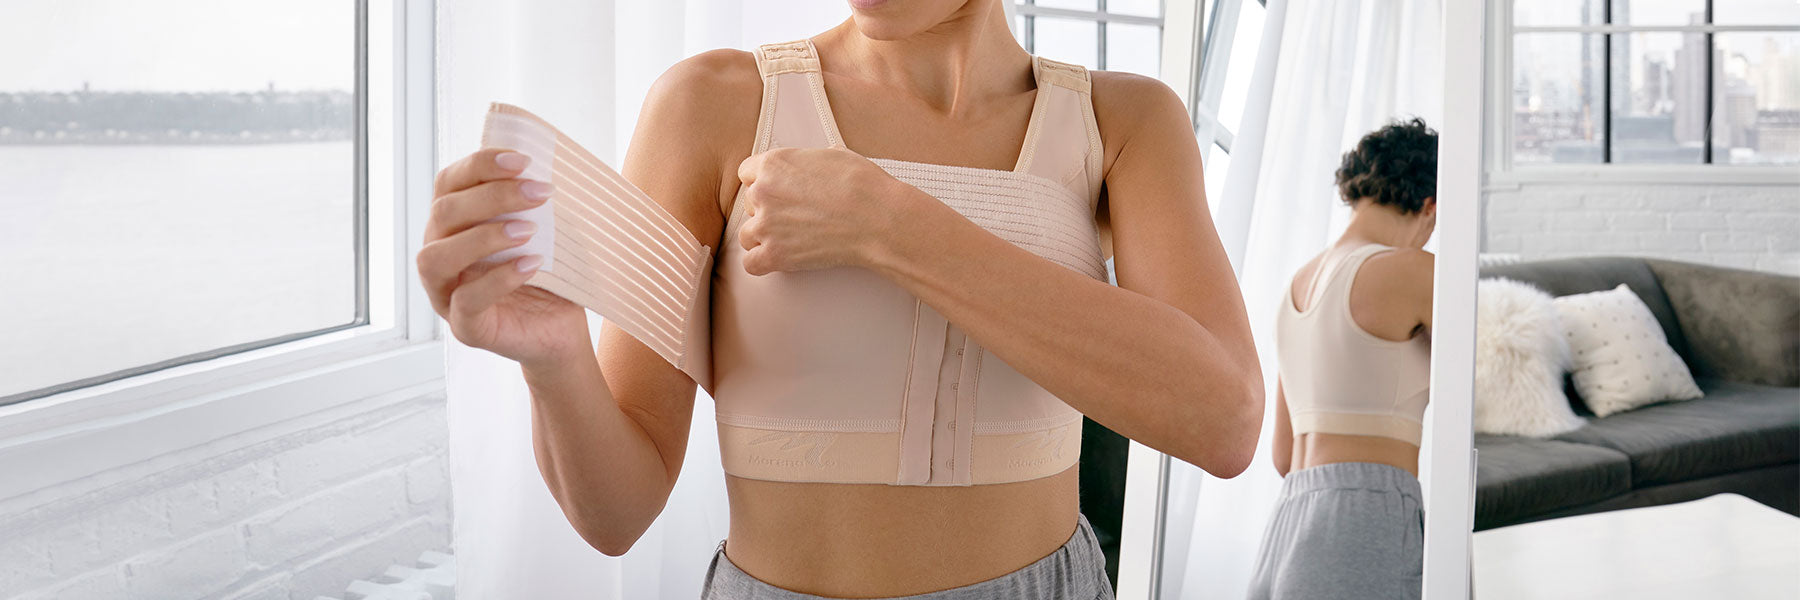 The Marena Group Launches Innovative FlexFit™ Technology  for Post-Surgical Compression Bras